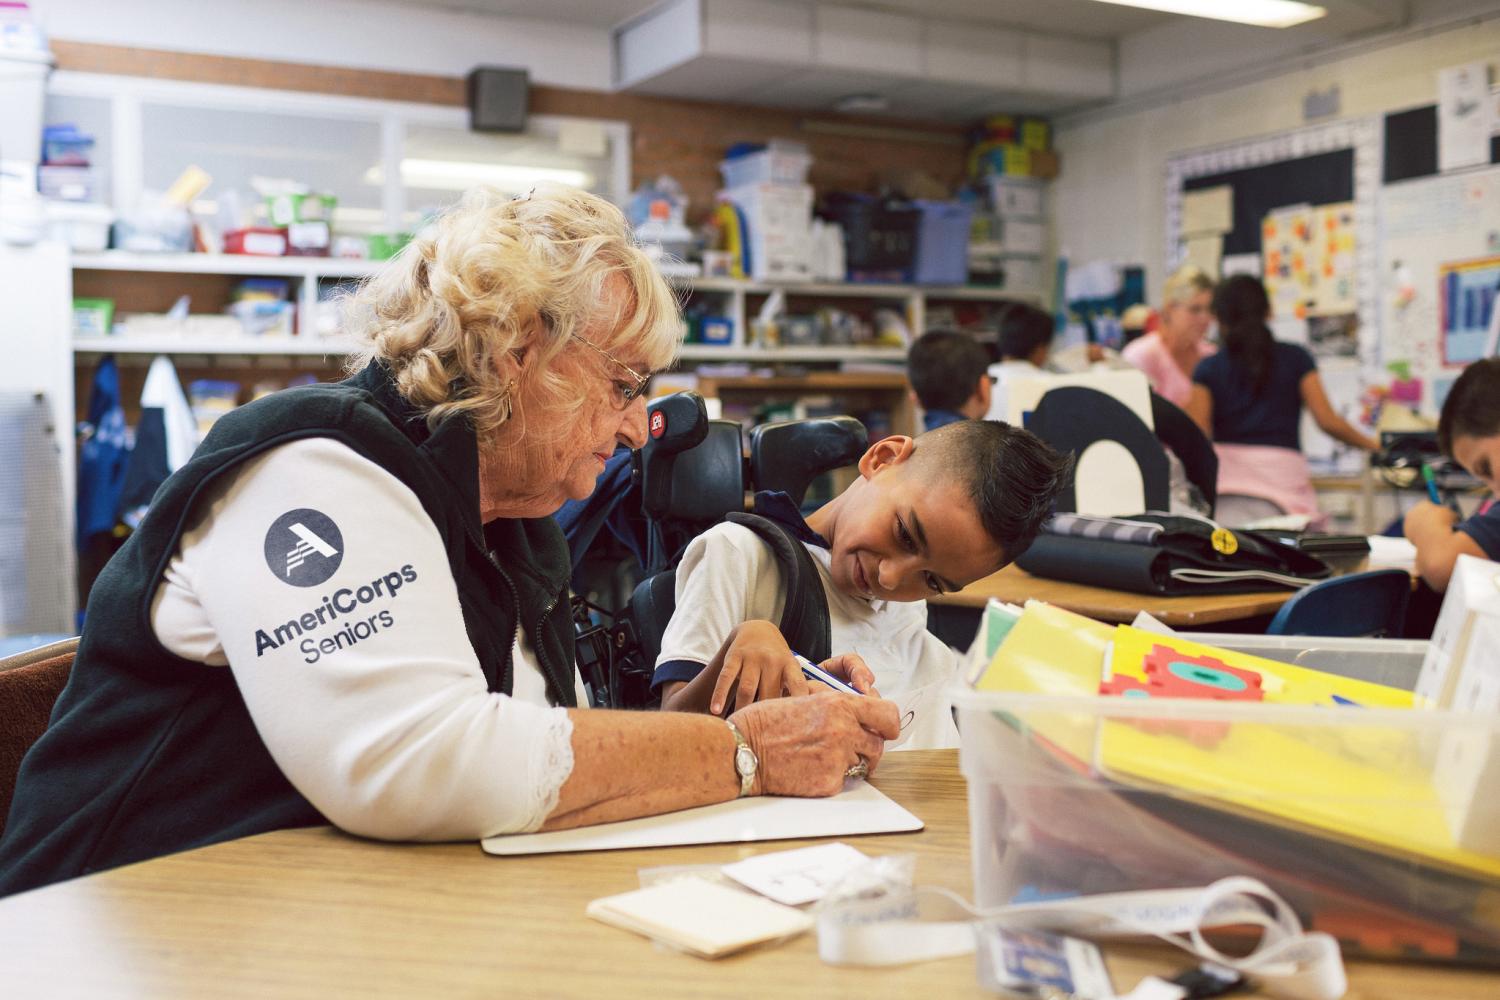 AmeriCorps Senior member helping a student with school work.